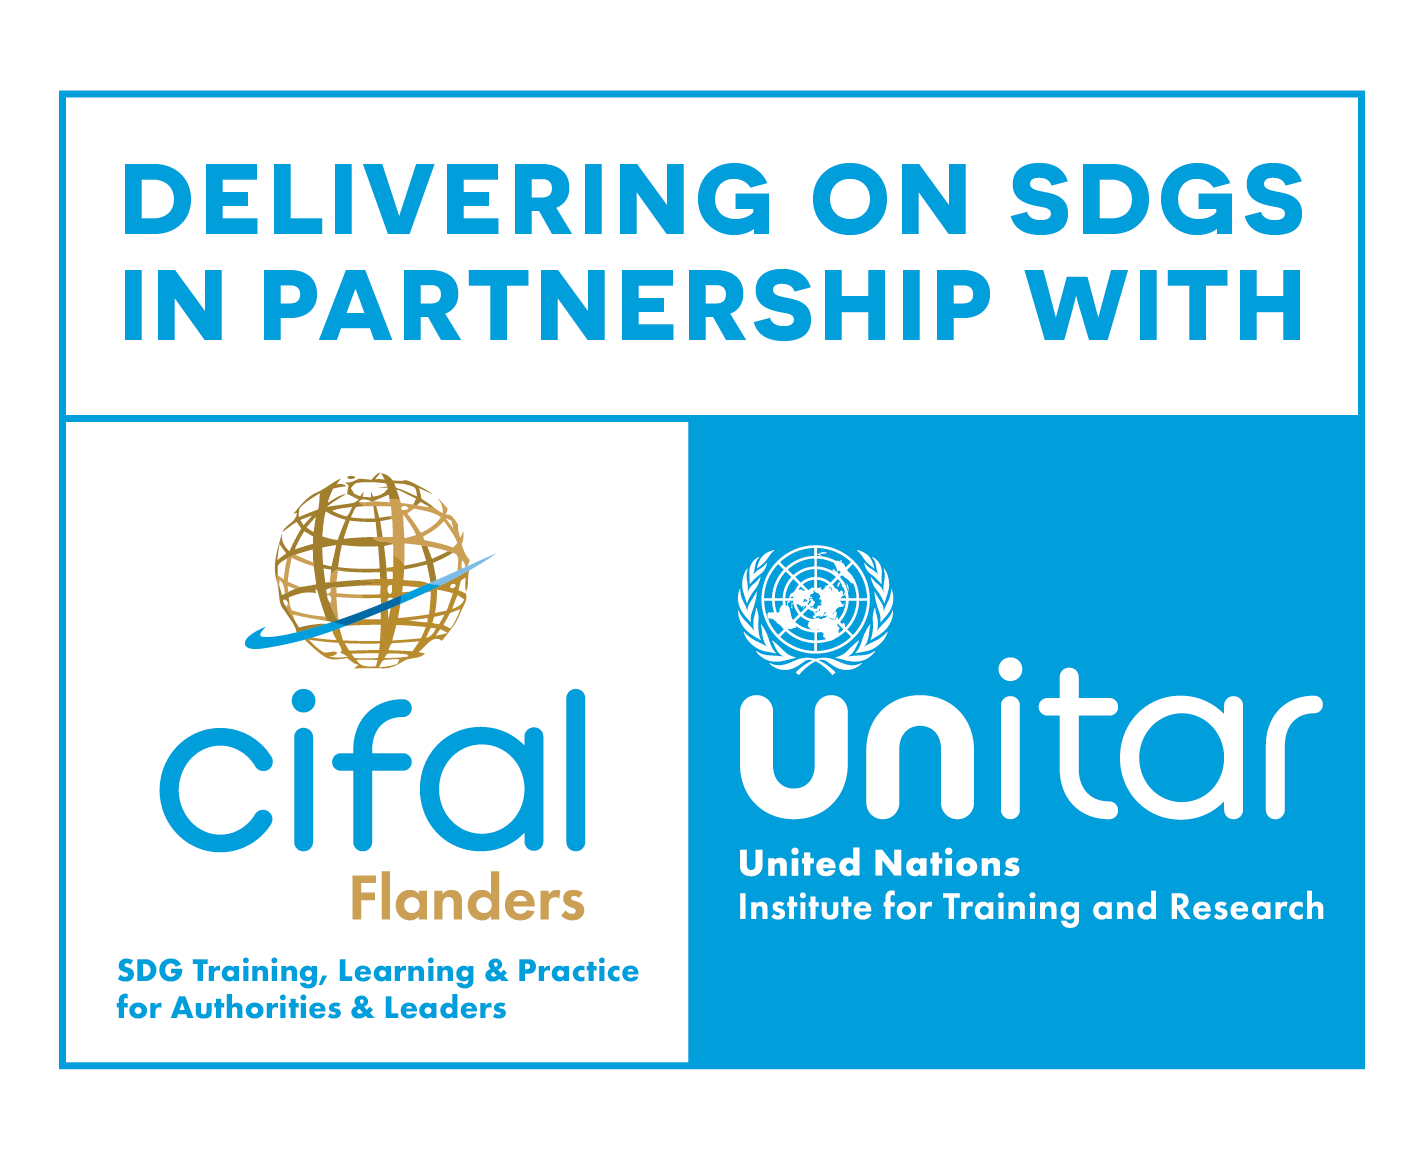 Delivering on SDG's in partnership with CIFAL